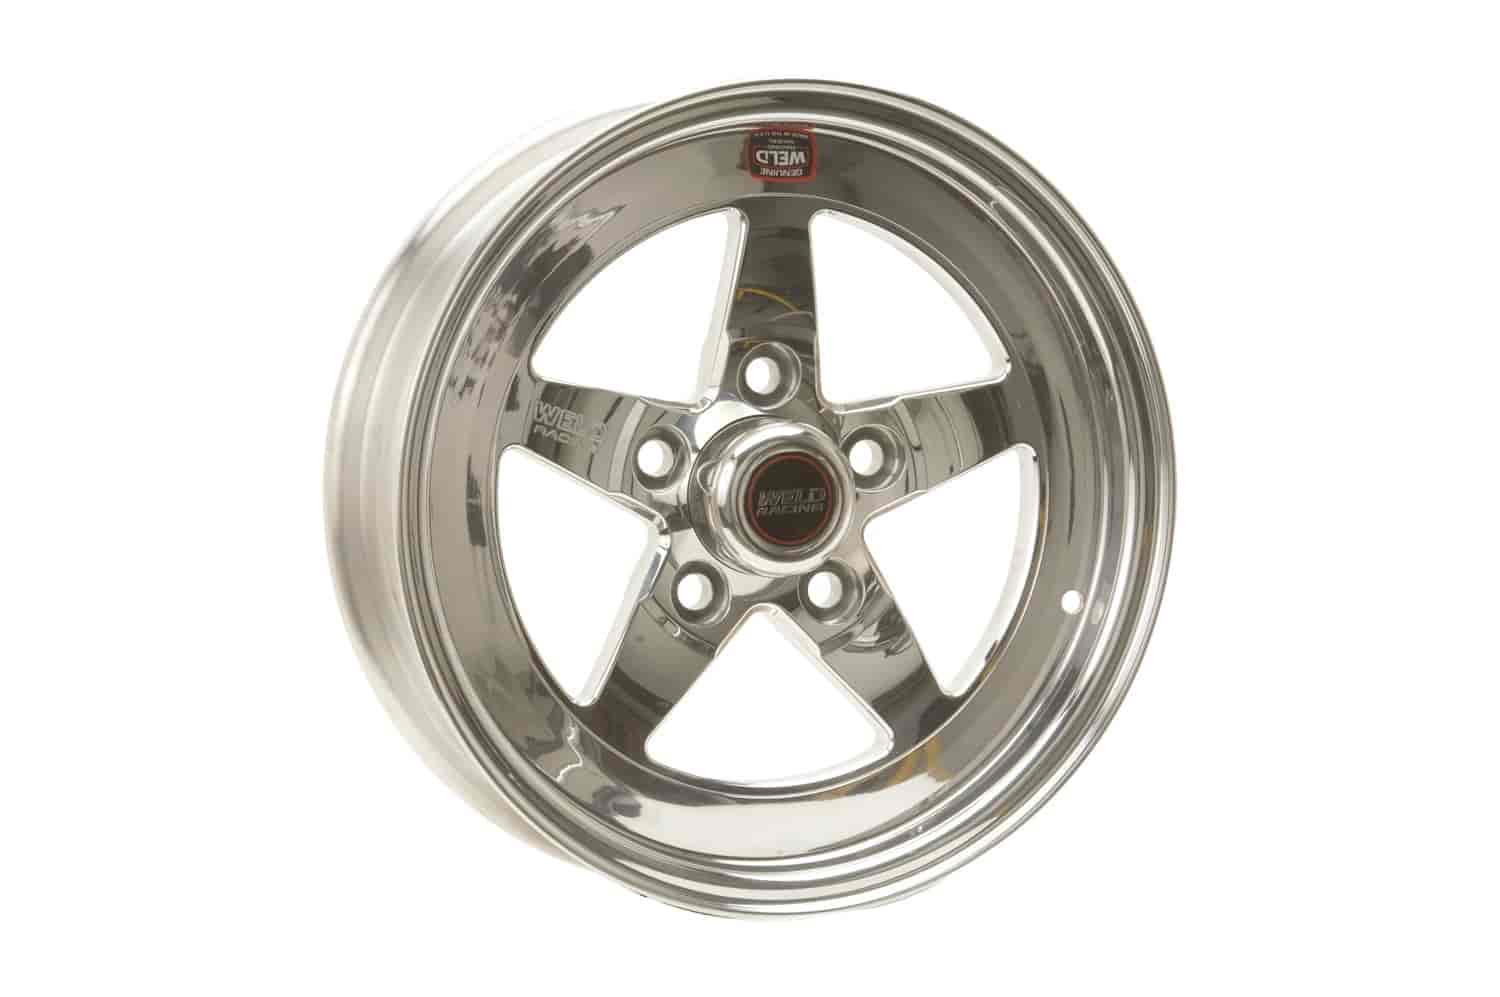 RT-S Series Wheel Size: 15" x 8" Bolt Circle: 5 x 4-1/2" Back Space: 4-1/2"